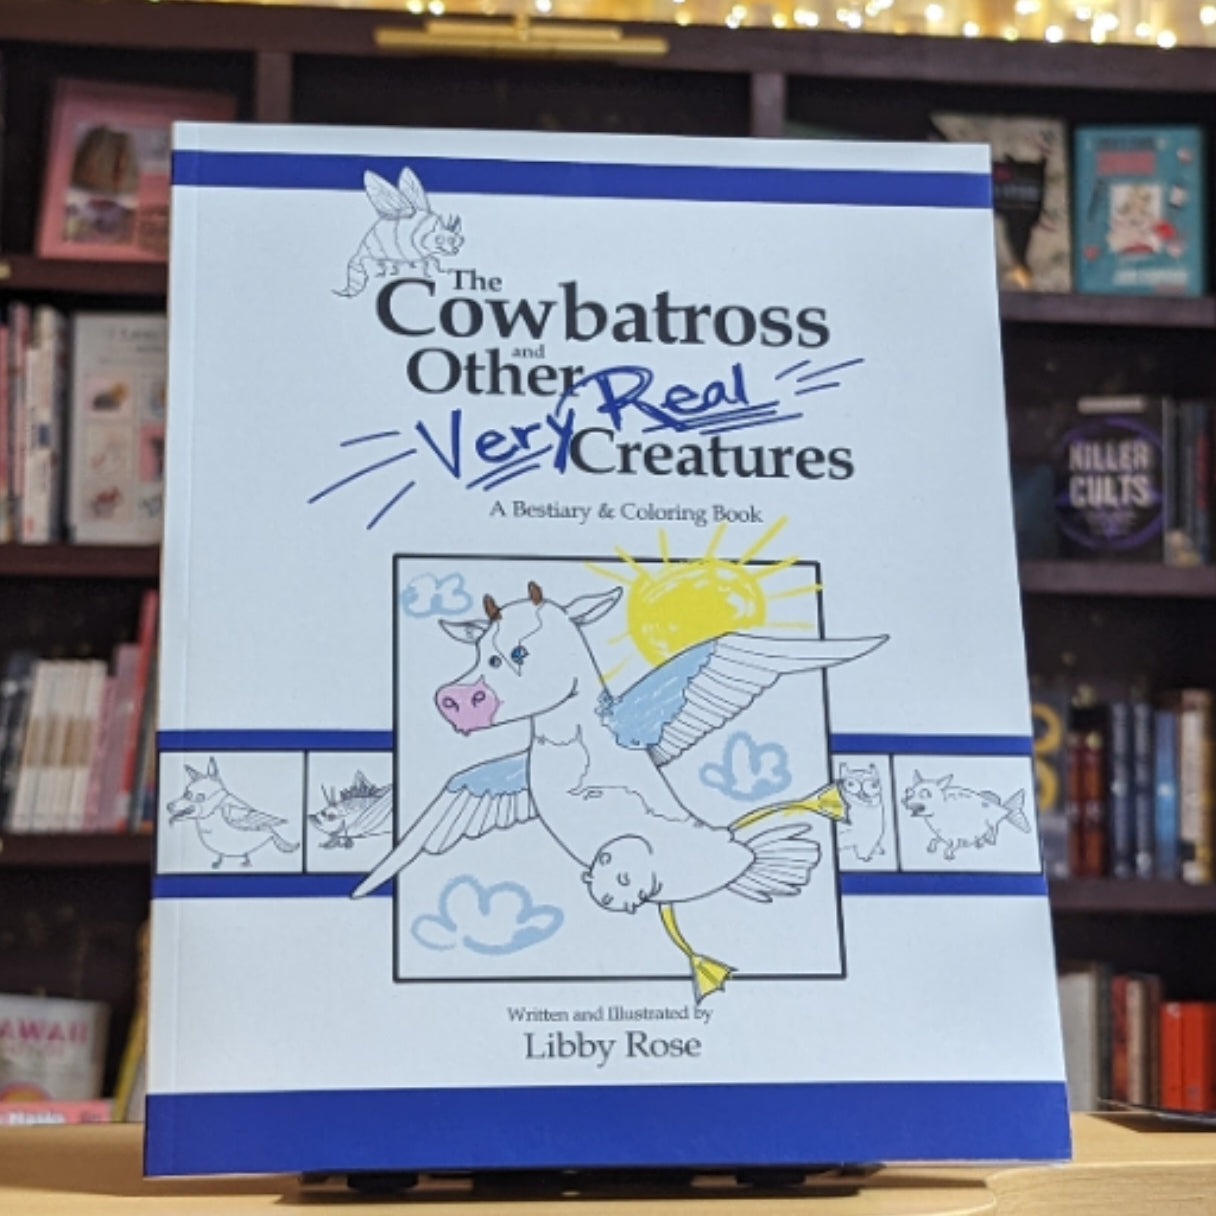 The Cowbatross and Other Very Real Creatures: A Bestiary & Coloring Book